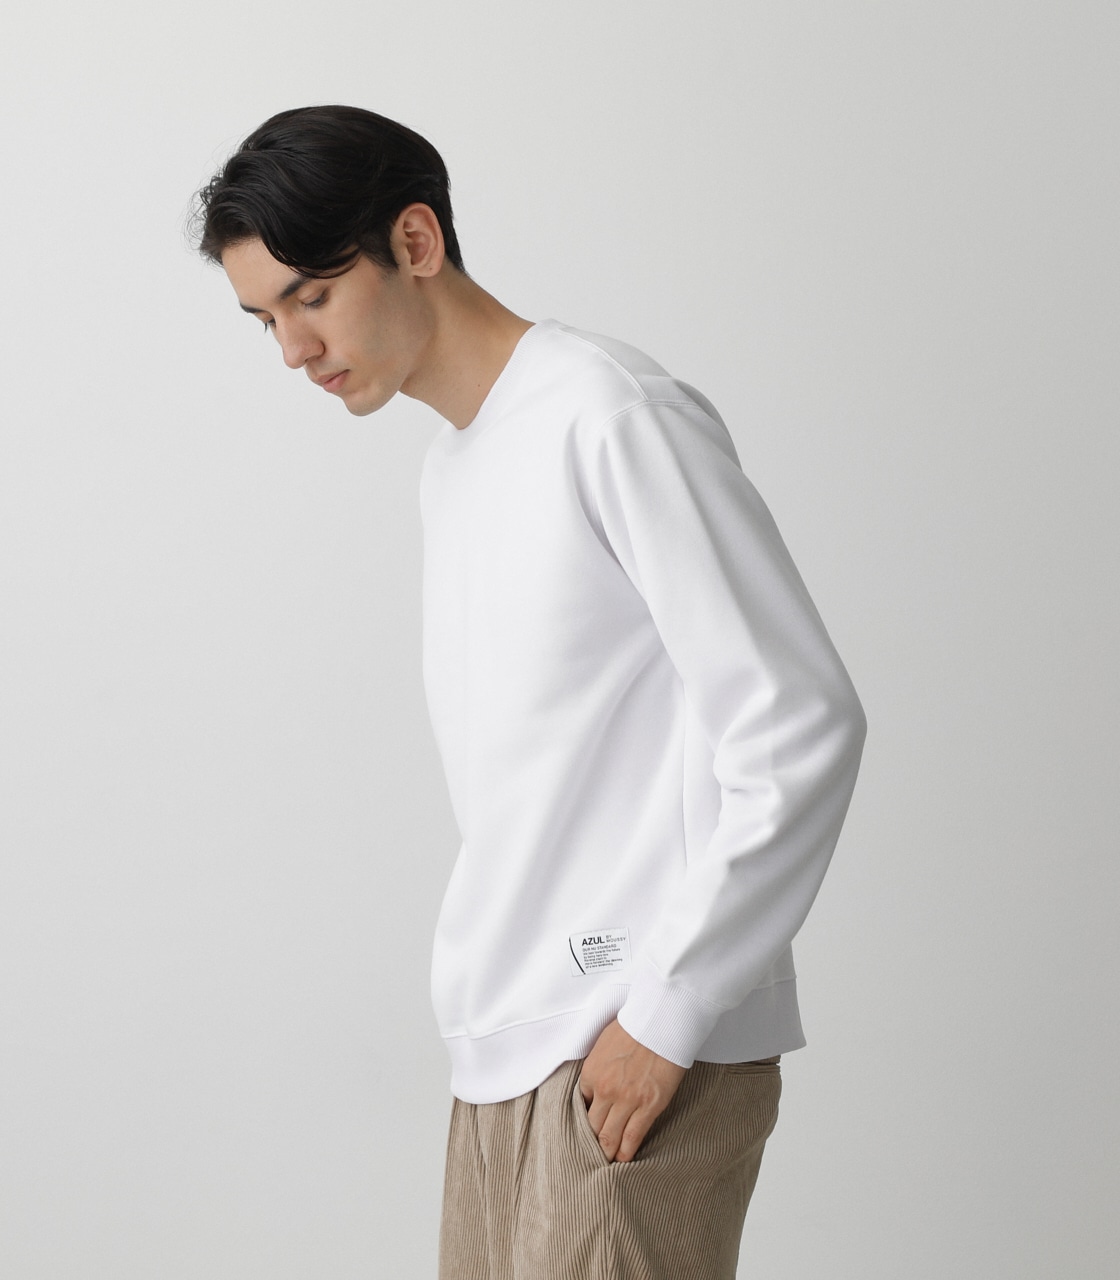 BRUSHED BACK COLOR TOPS/ブラッシュドバックカラートップス 詳細画像 WHT 3